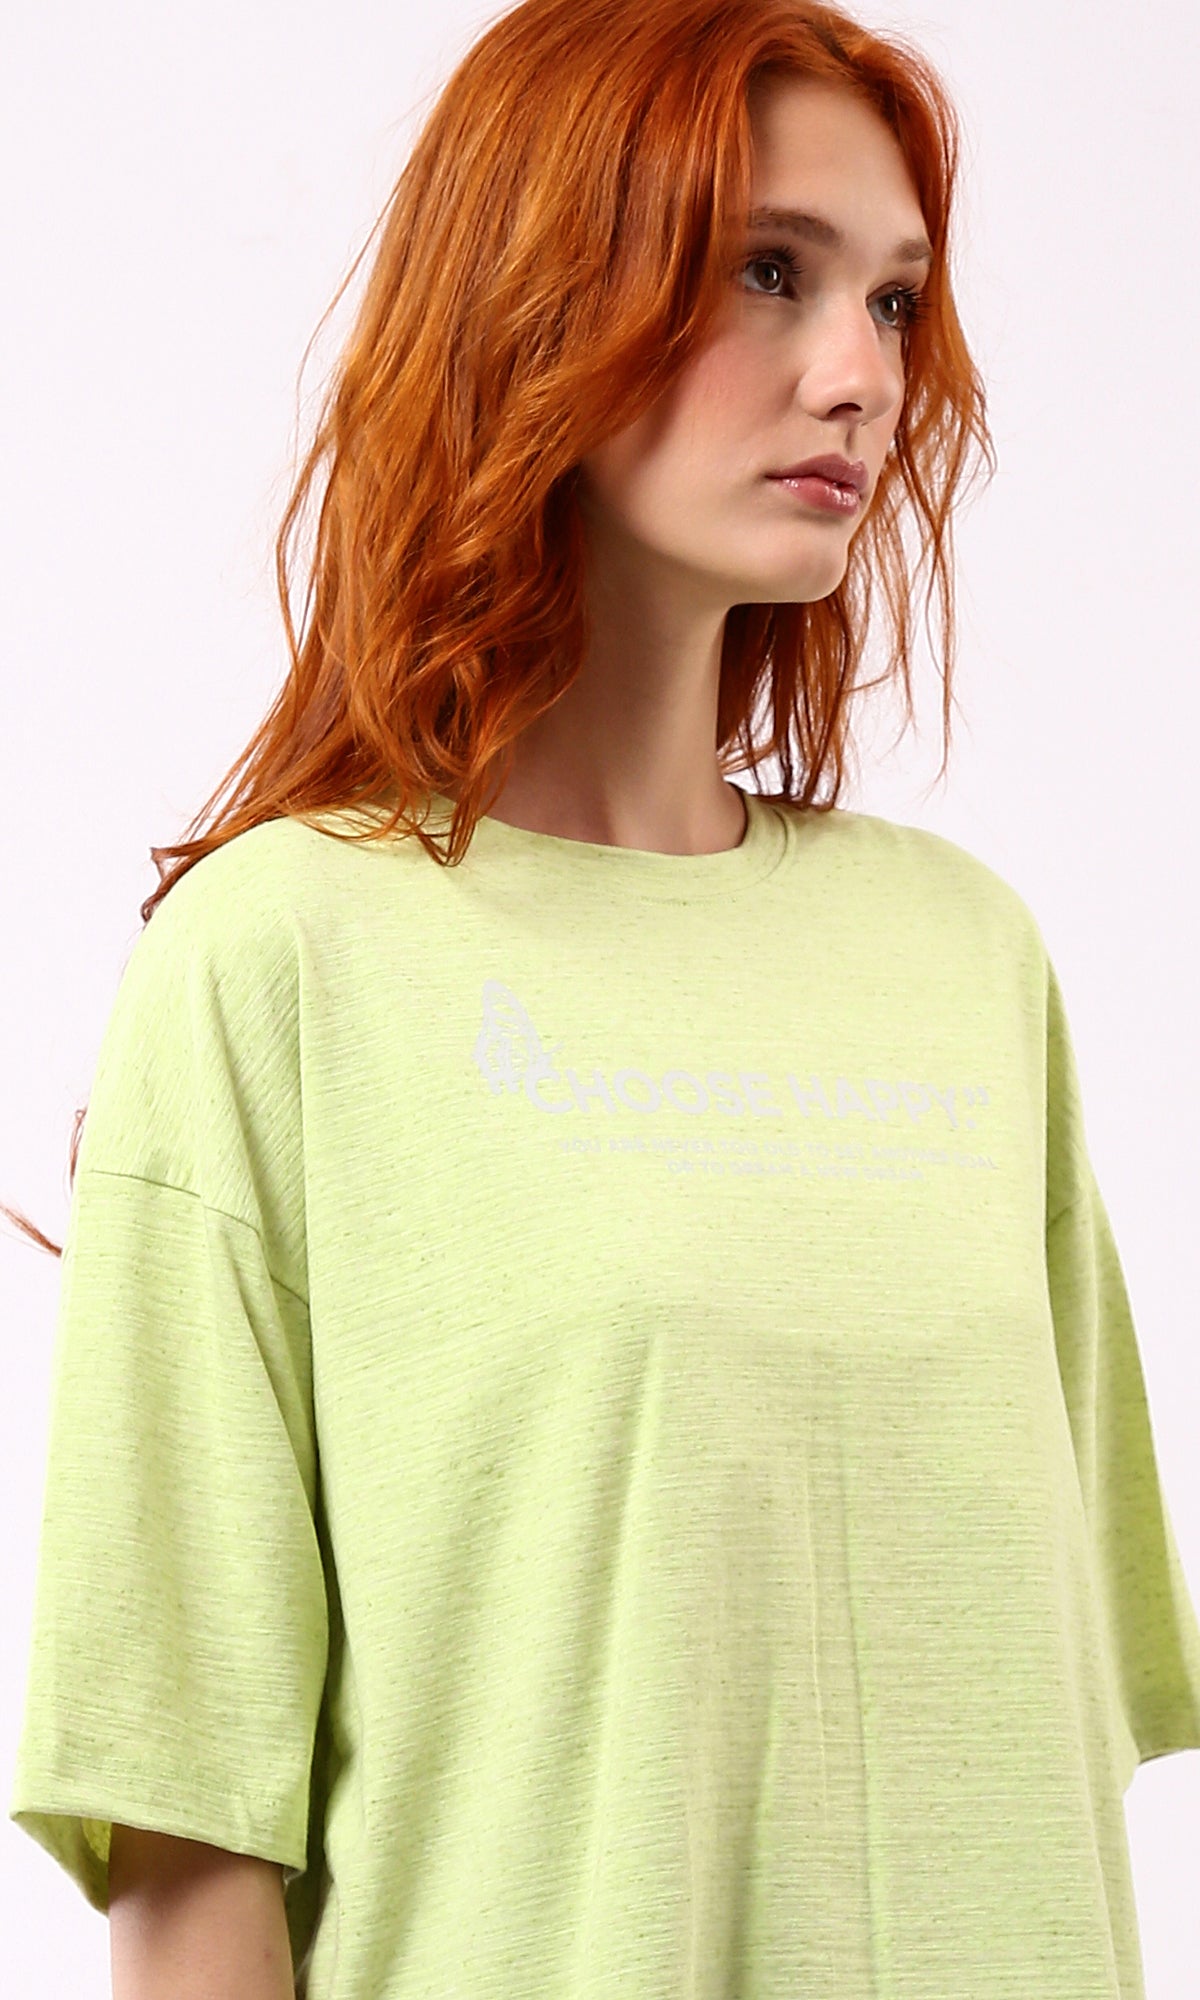 O181665 "Choose Happy" Printed Loose Fit Cotton Tee - Neon Green